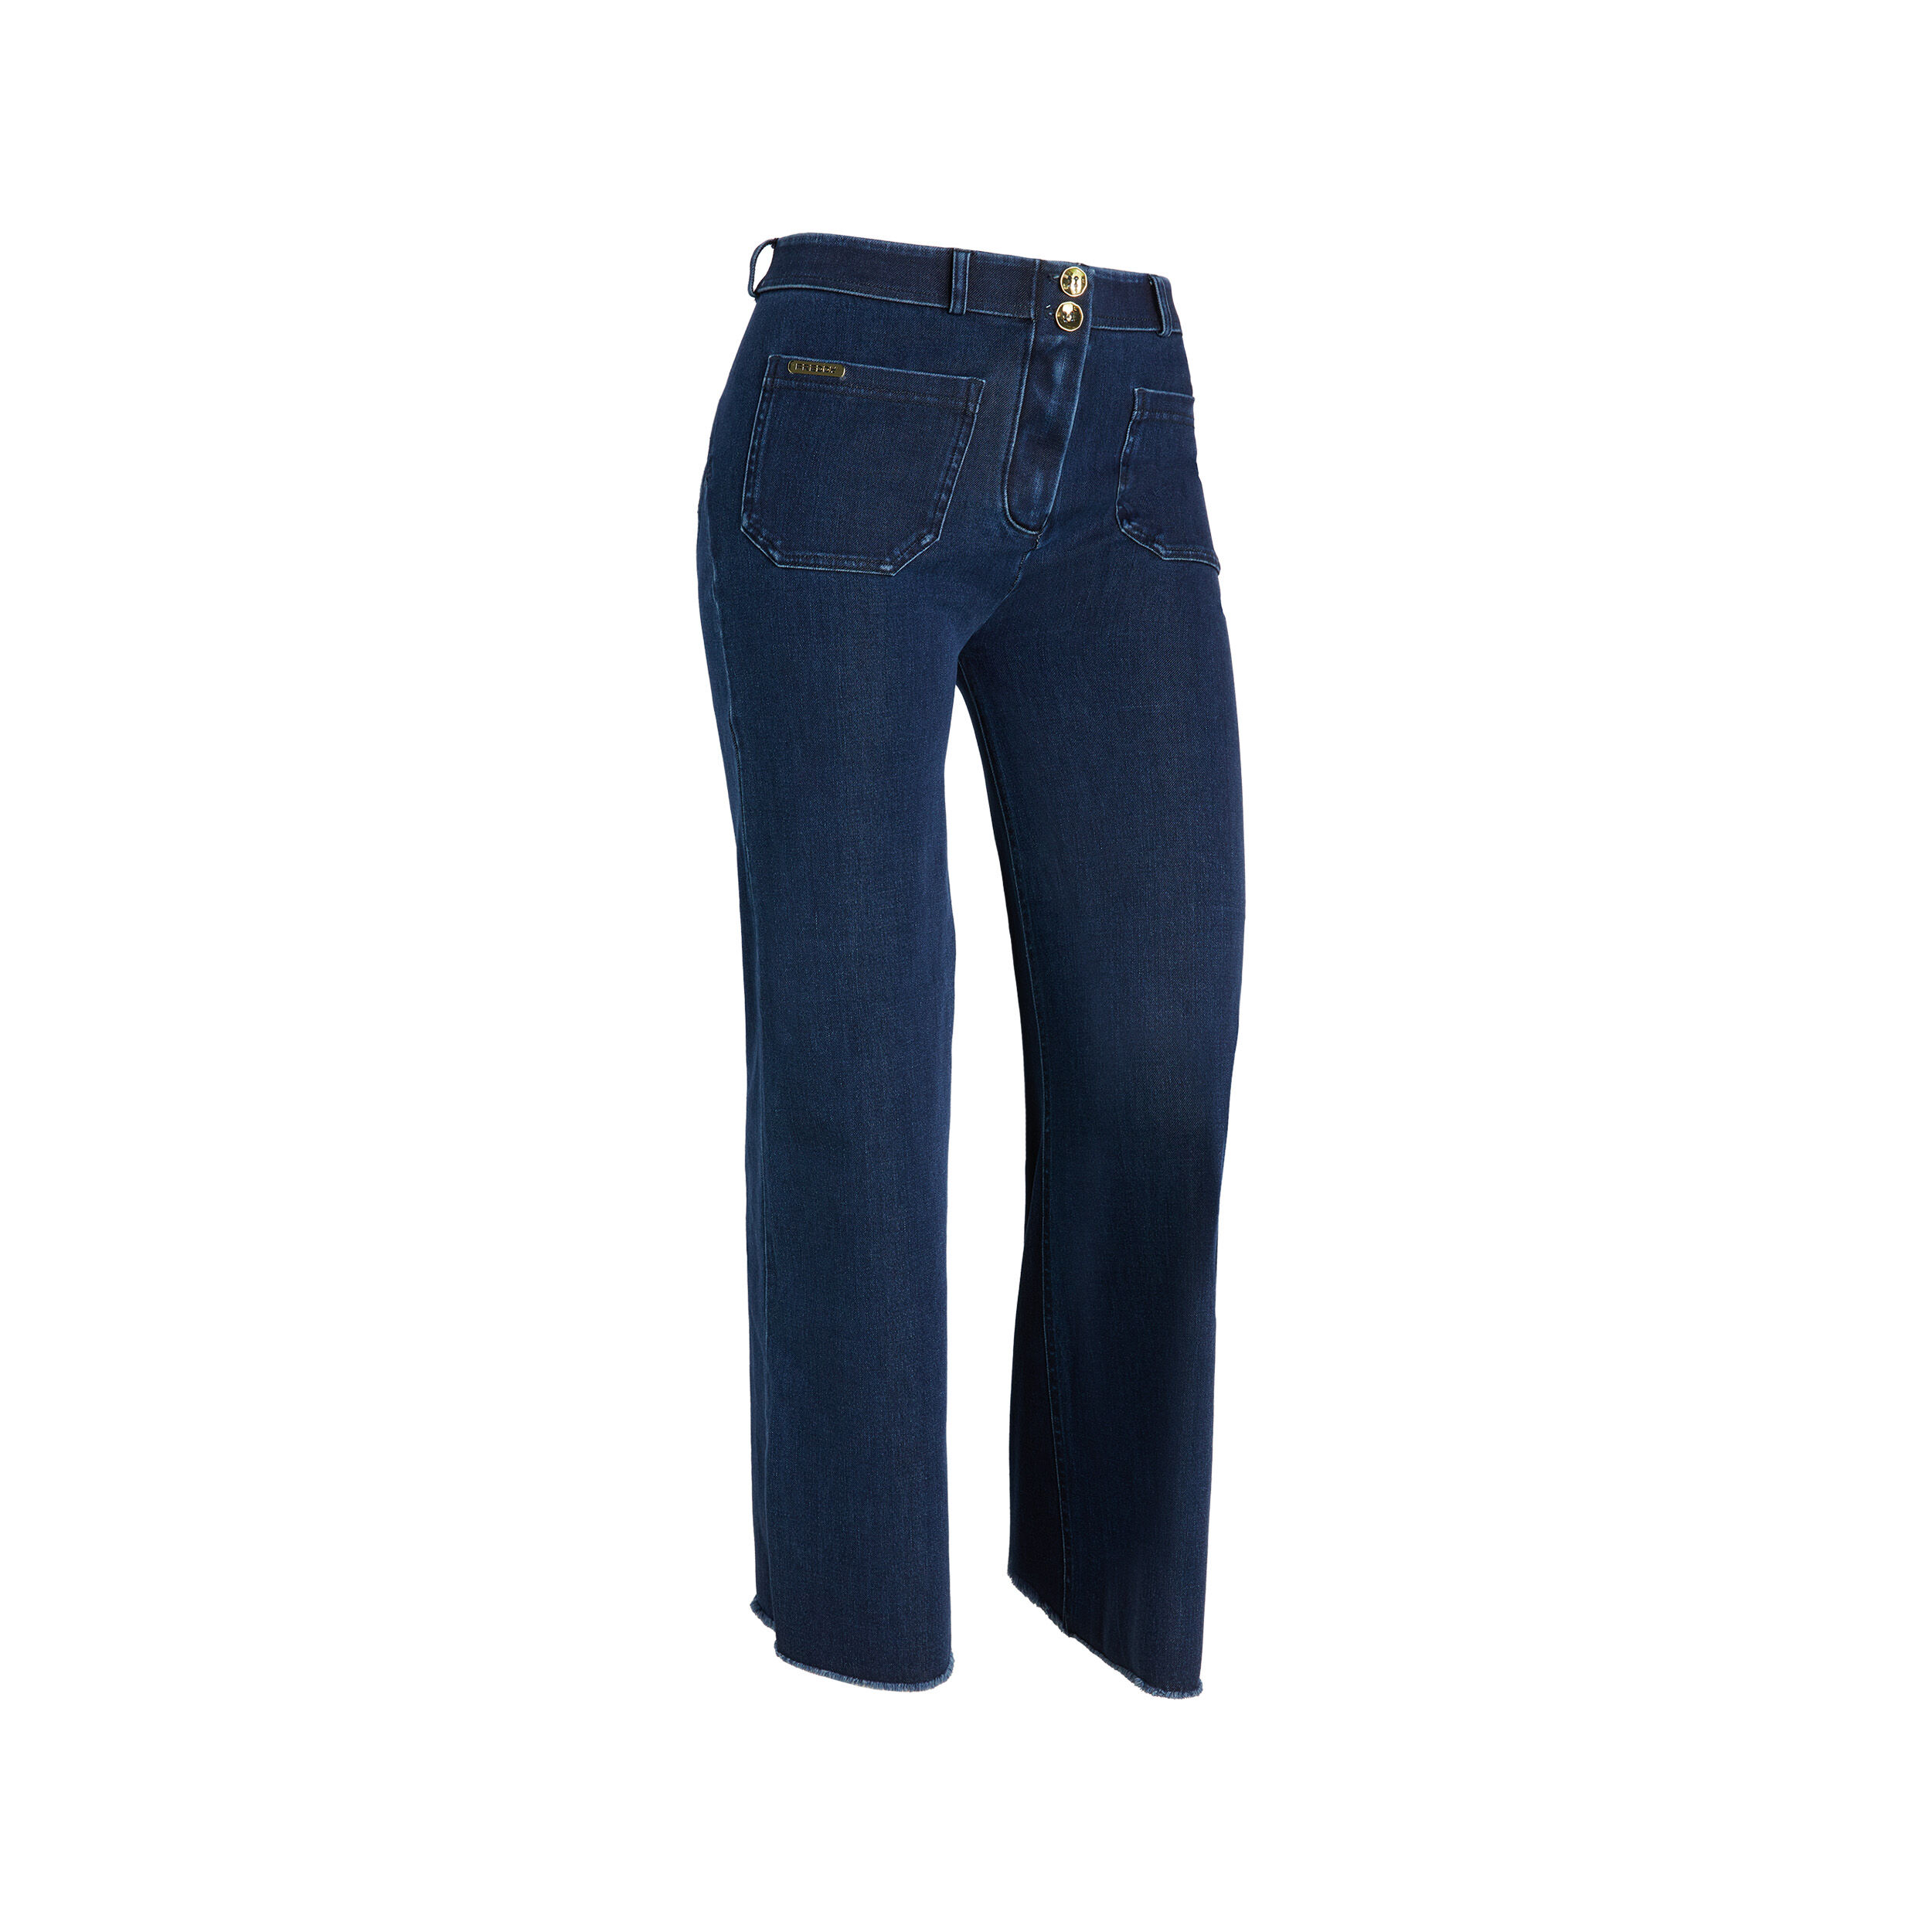 Freddy Jeans push up WR.UP® wide leg fondo distressed Dark Jeans-Seams On Tone Donna Large